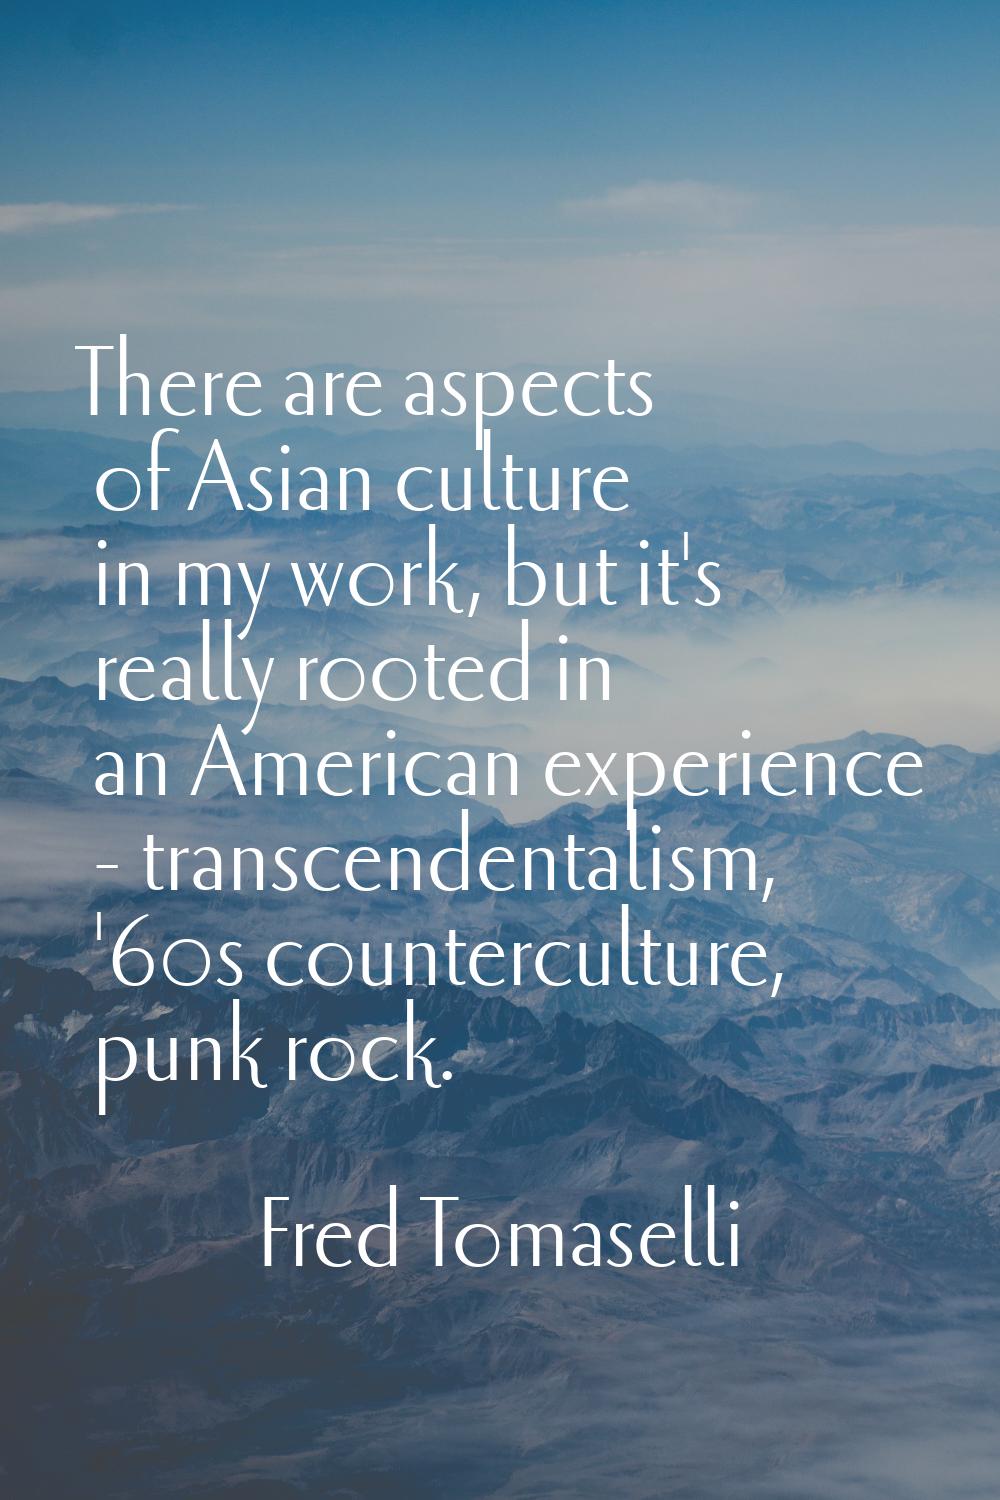 There are aspects of Asian culture in my work, but it's really rooted in an American experience - t